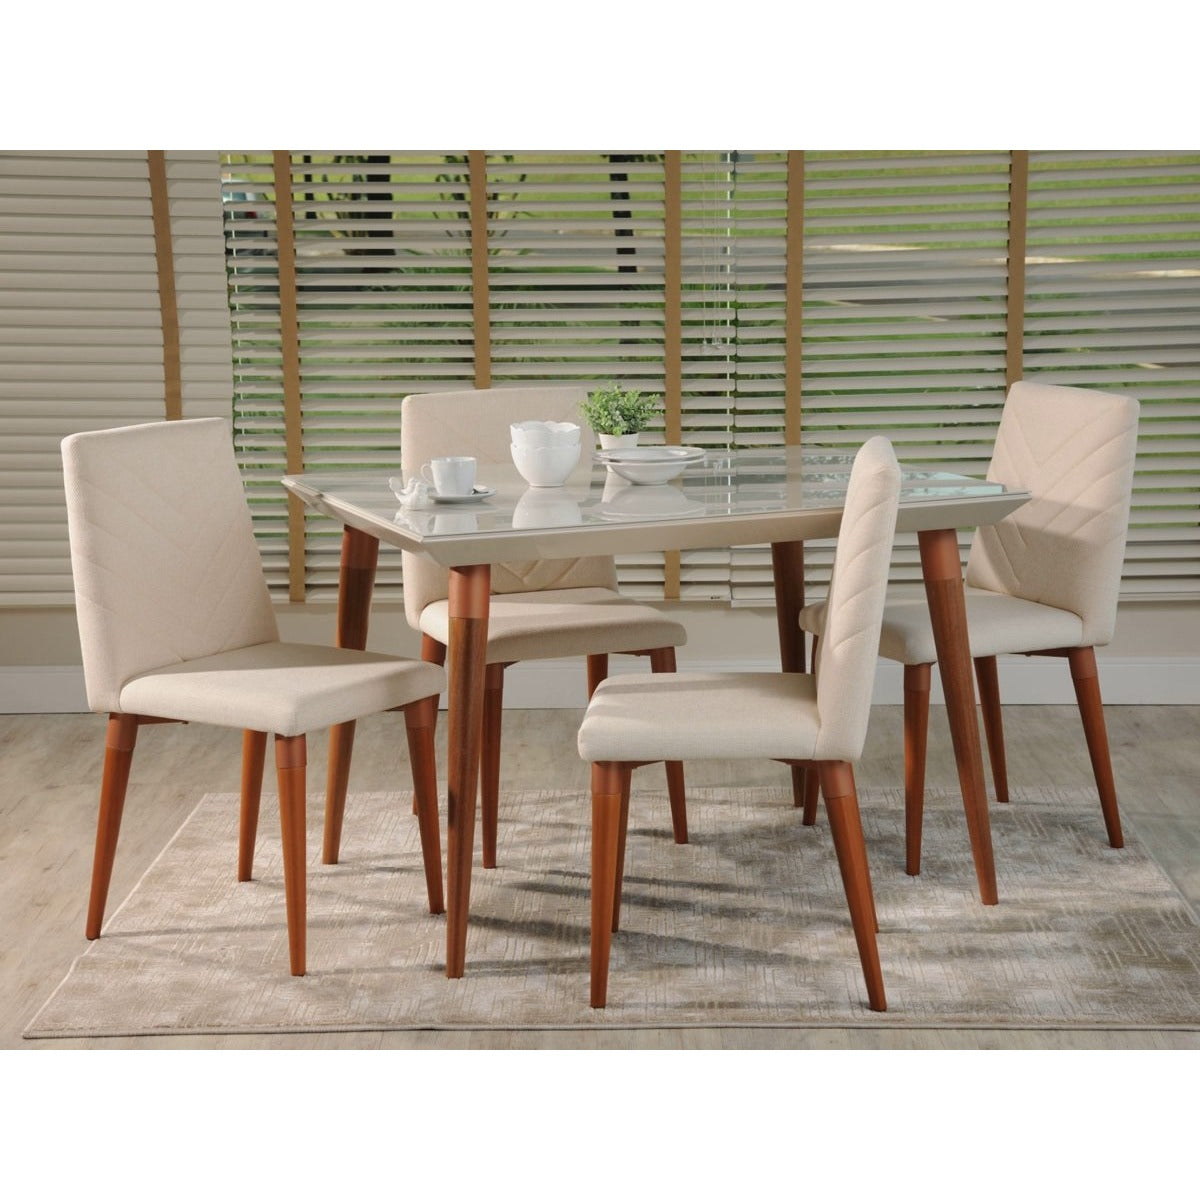 Manhattan Comfort 5-Piece Utopia 47.24" Dining Set with 4 Dining Chairs in White Gloss and Beige-Minimal & Modern